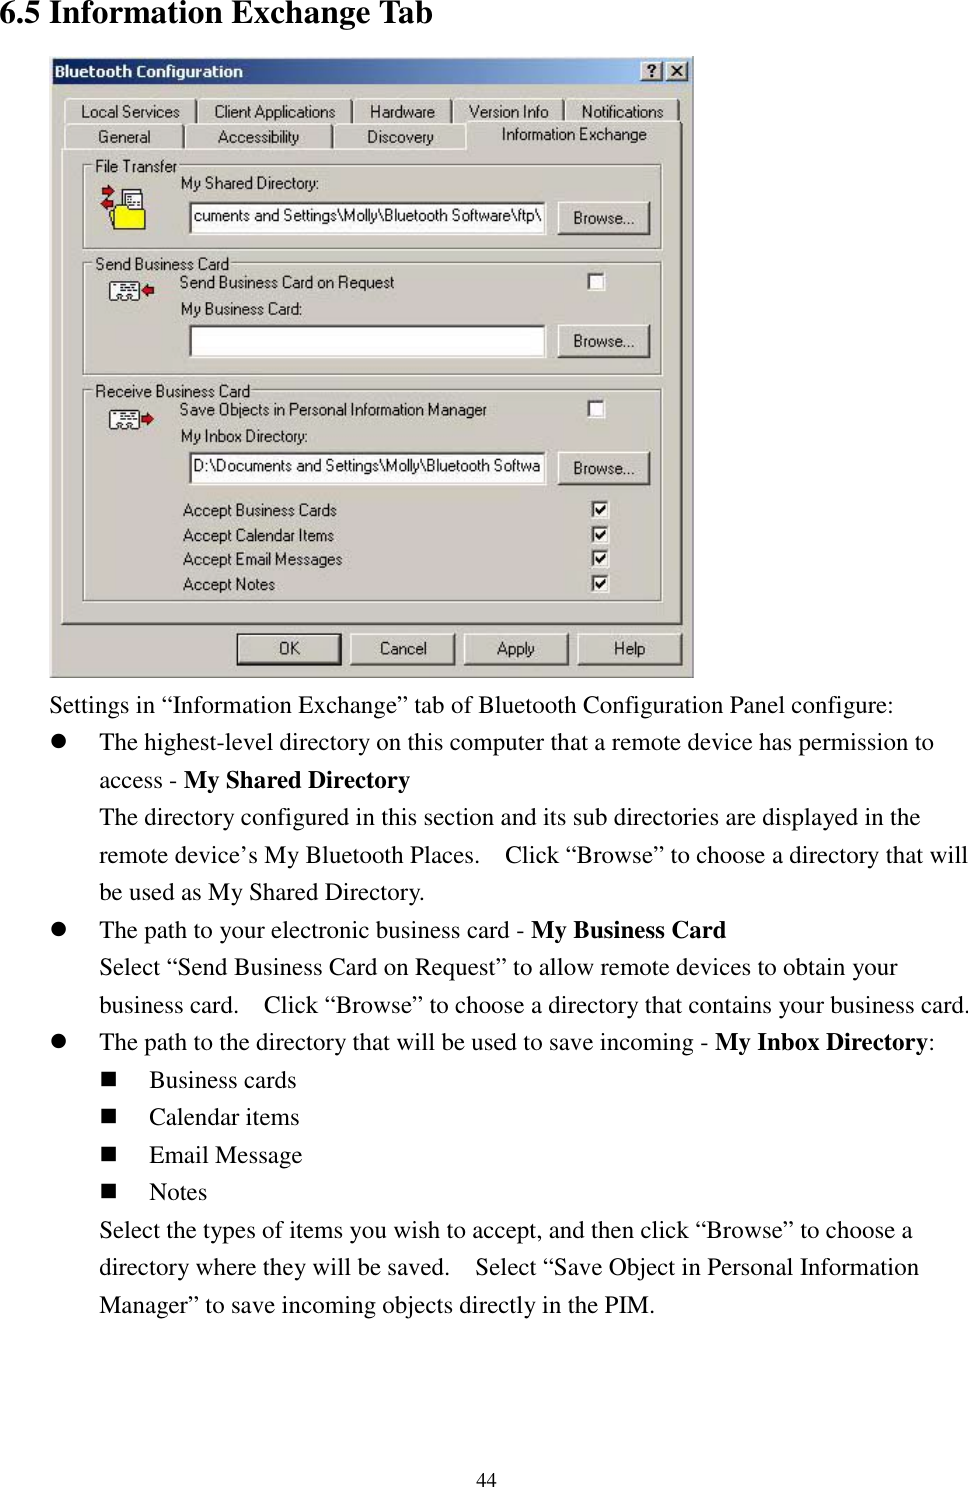 446.5 Information Exchange TabSettings in “Information Exchange” tab of Bluetooth Configuration Panel configure:! The highest-level directory on this computer that a remote device has permission toaccess - My Shared DirectoryThe directory configured in this section and its sub directories are displayed in theremote device’s My Bluetooth Places.    Click “Browse” to choose a directory that willbe used as My Shared Directory.! The path to your electronic business card - My Business CardSelect “Send Business Card on Request” to allow remote devices to obtain yourbusiness card.    Click “Browse” to choose a directory that contains your business card.! The path to the directory that will be used to save incoming - My Inbox Directory:&quot; Business cards&quot; Calendar items&quot; Email Message&quot; NotesSelect the types of items you wish to accept, and then click “Browse” to choose adirectory where they will be saved.    Select “Save Object in Personal InformationManager” to save incoming objects directly in the PIM.